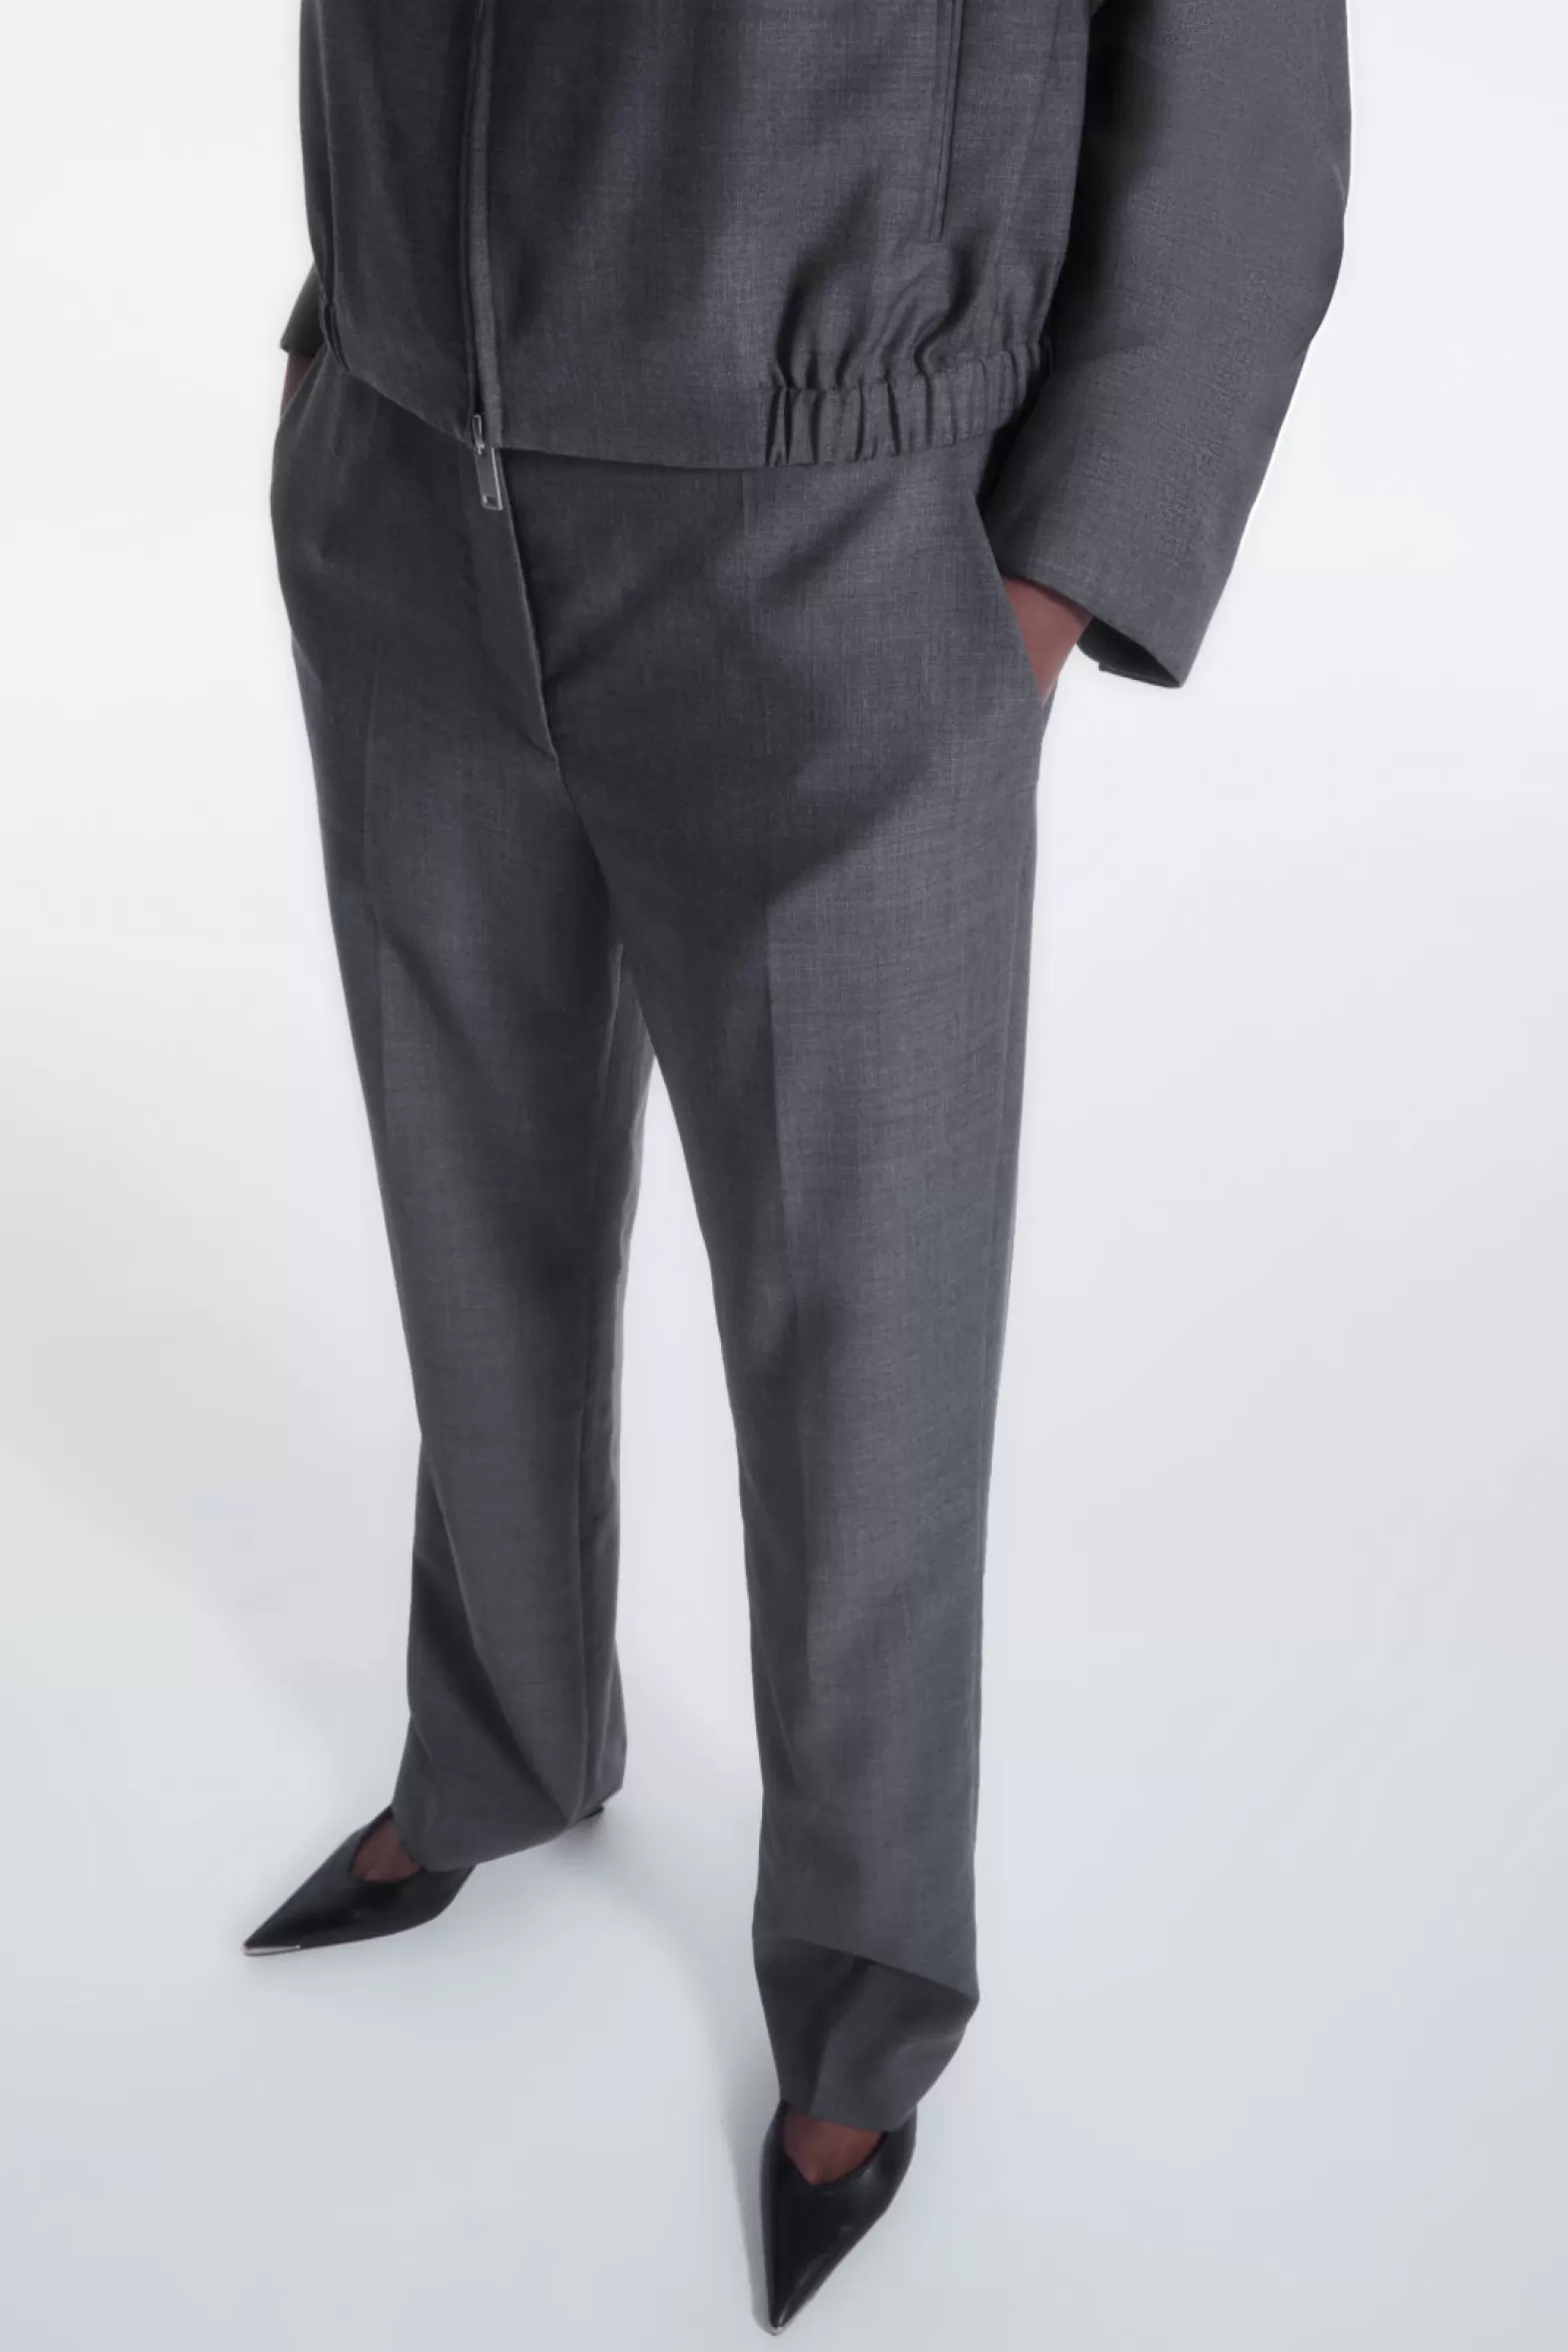 COS SLIM TAILORED WOOL TROUSERS